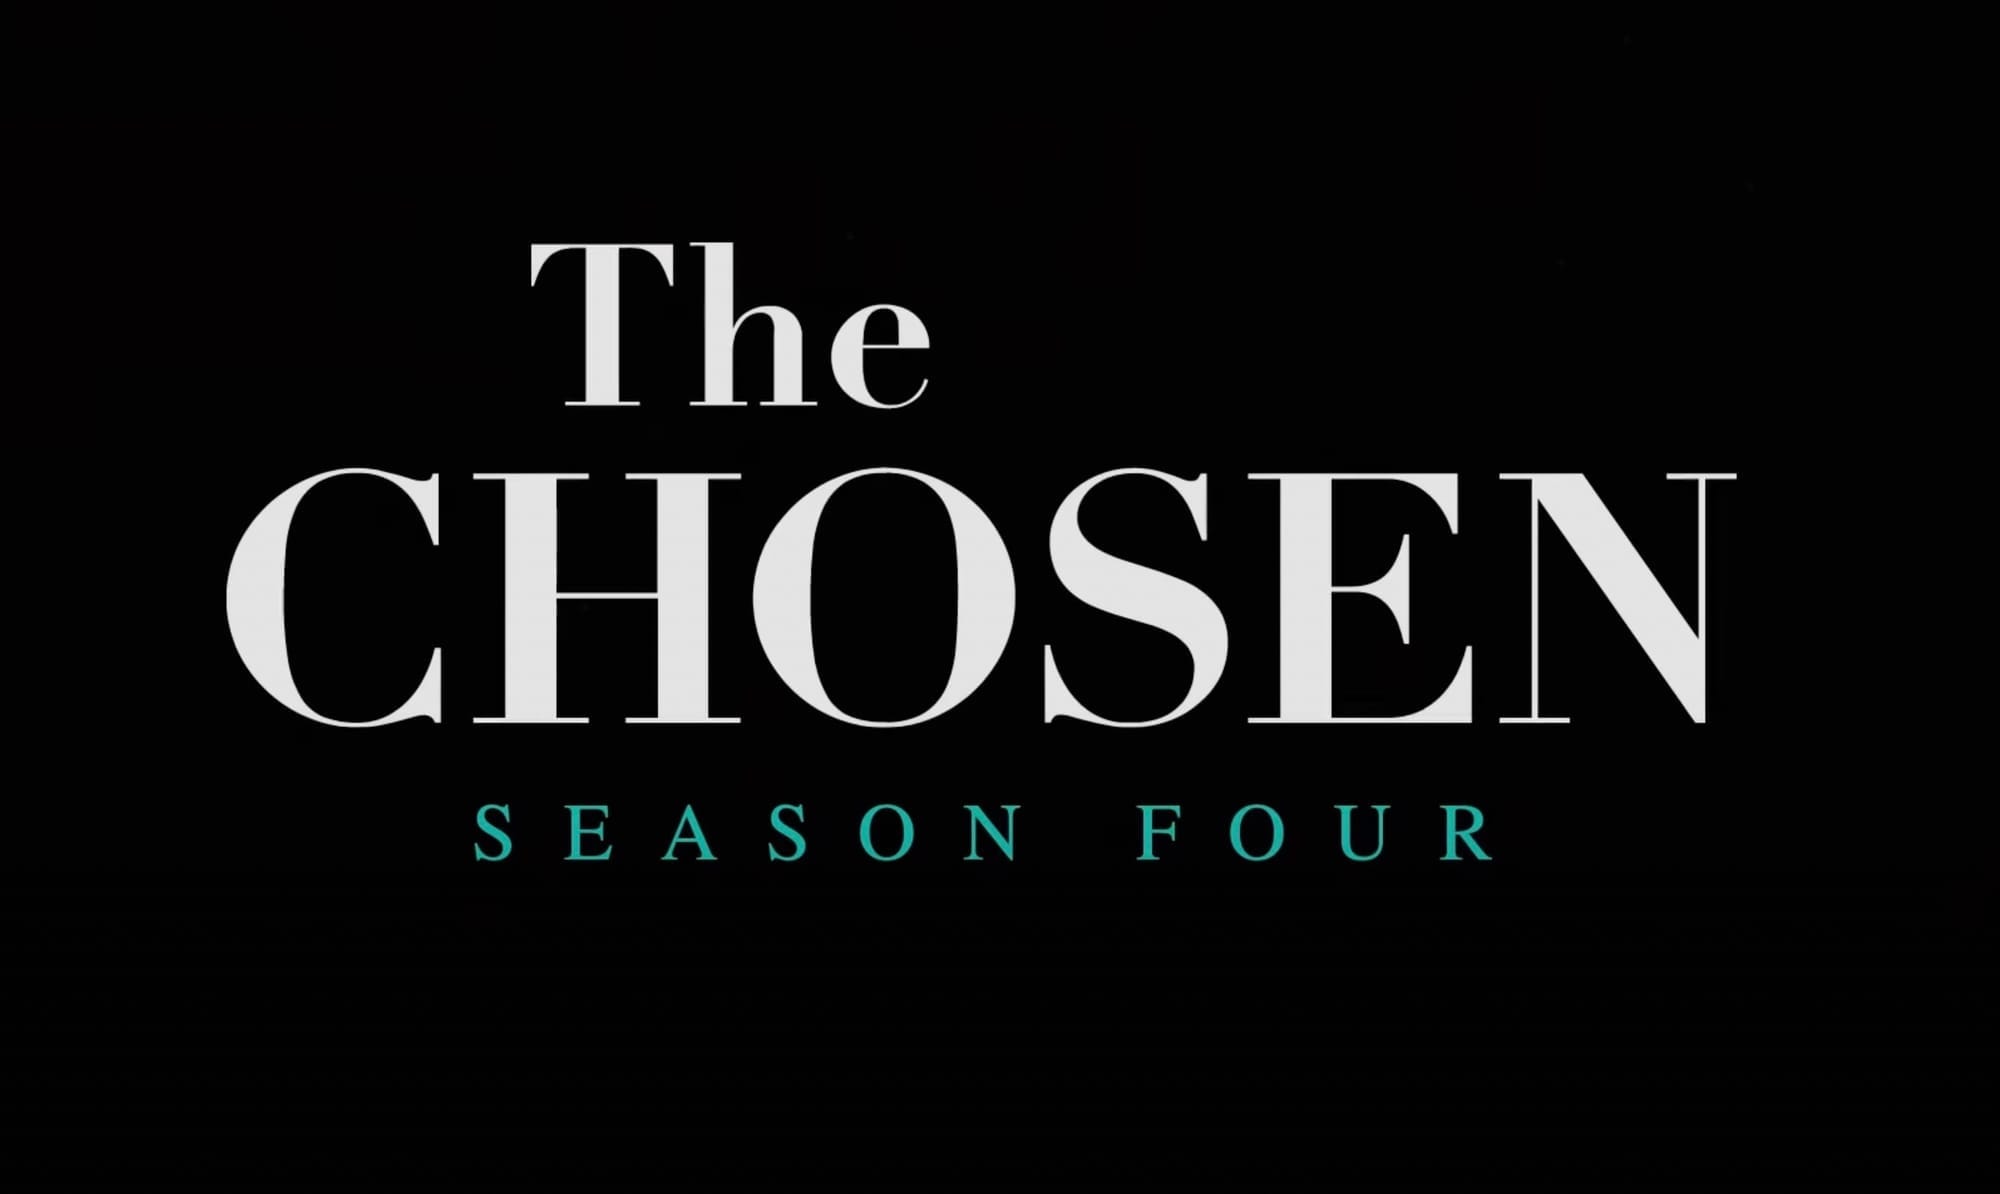 The Chosen S4 is Finally Coming to Streaming After Legal Dispute With Angel